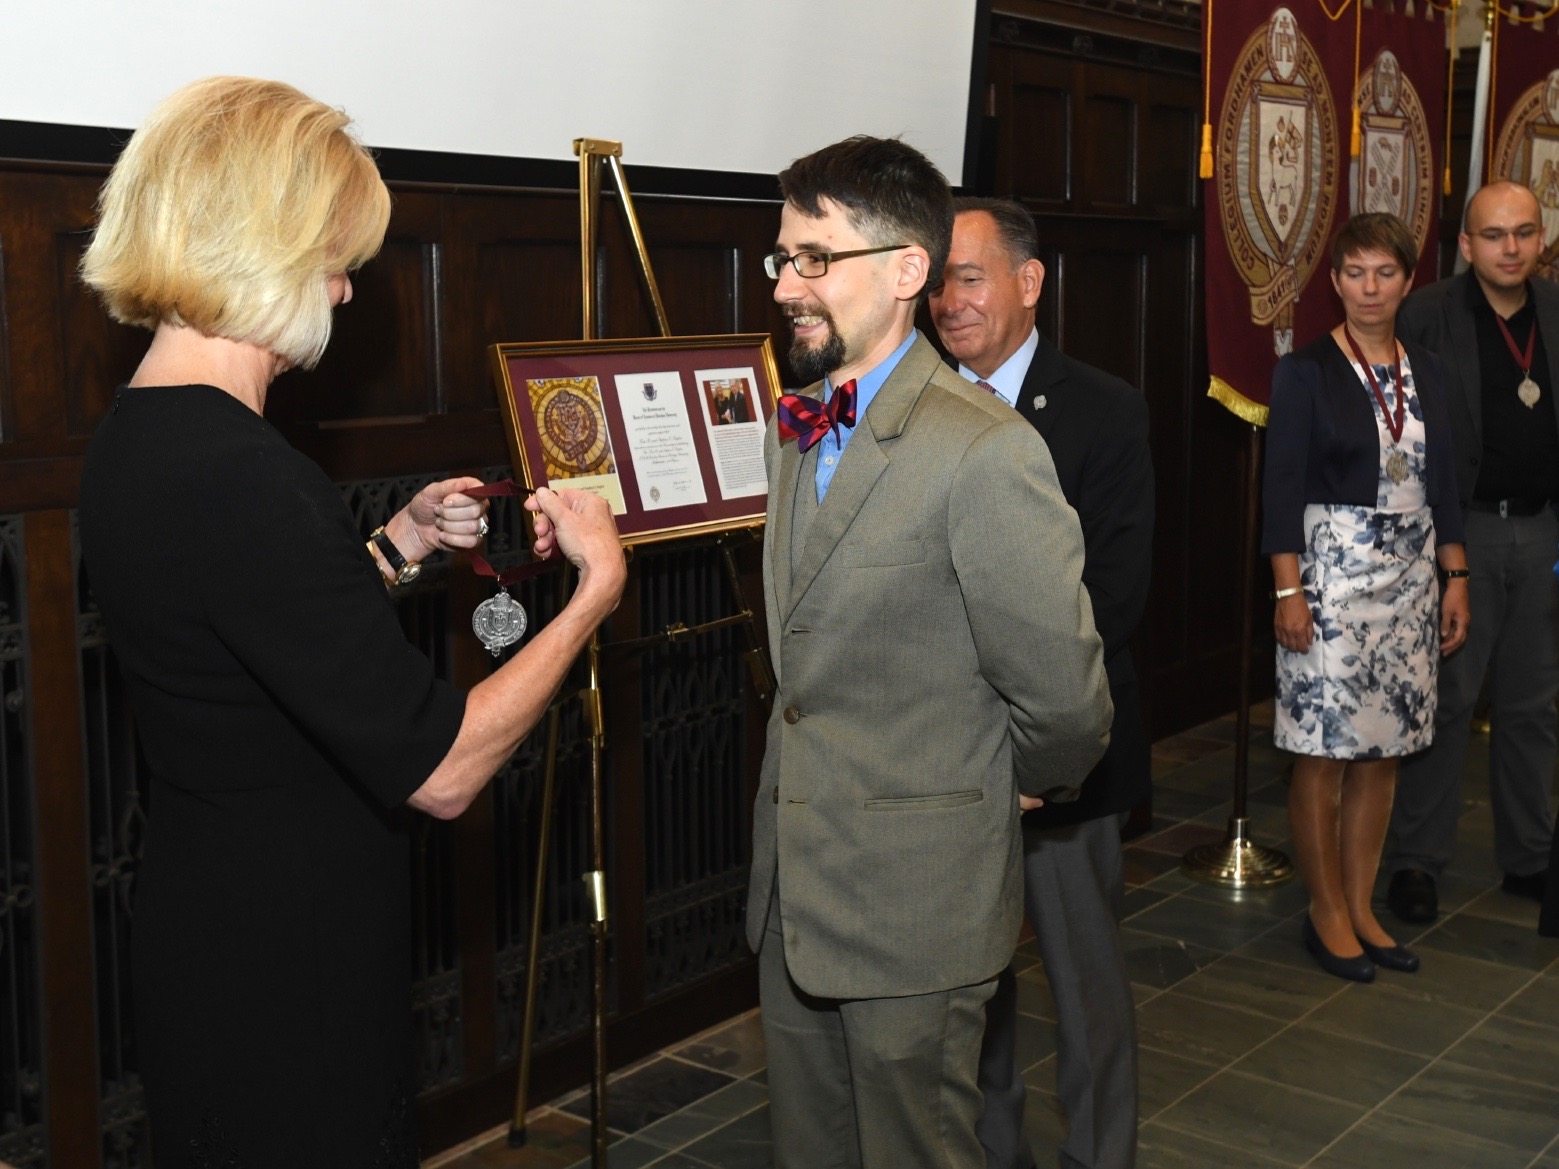 Kim Bepler presents Joshua Schrier, the Kim B. and Stephen E. Bepler Chair in Chemistry, with his medal.